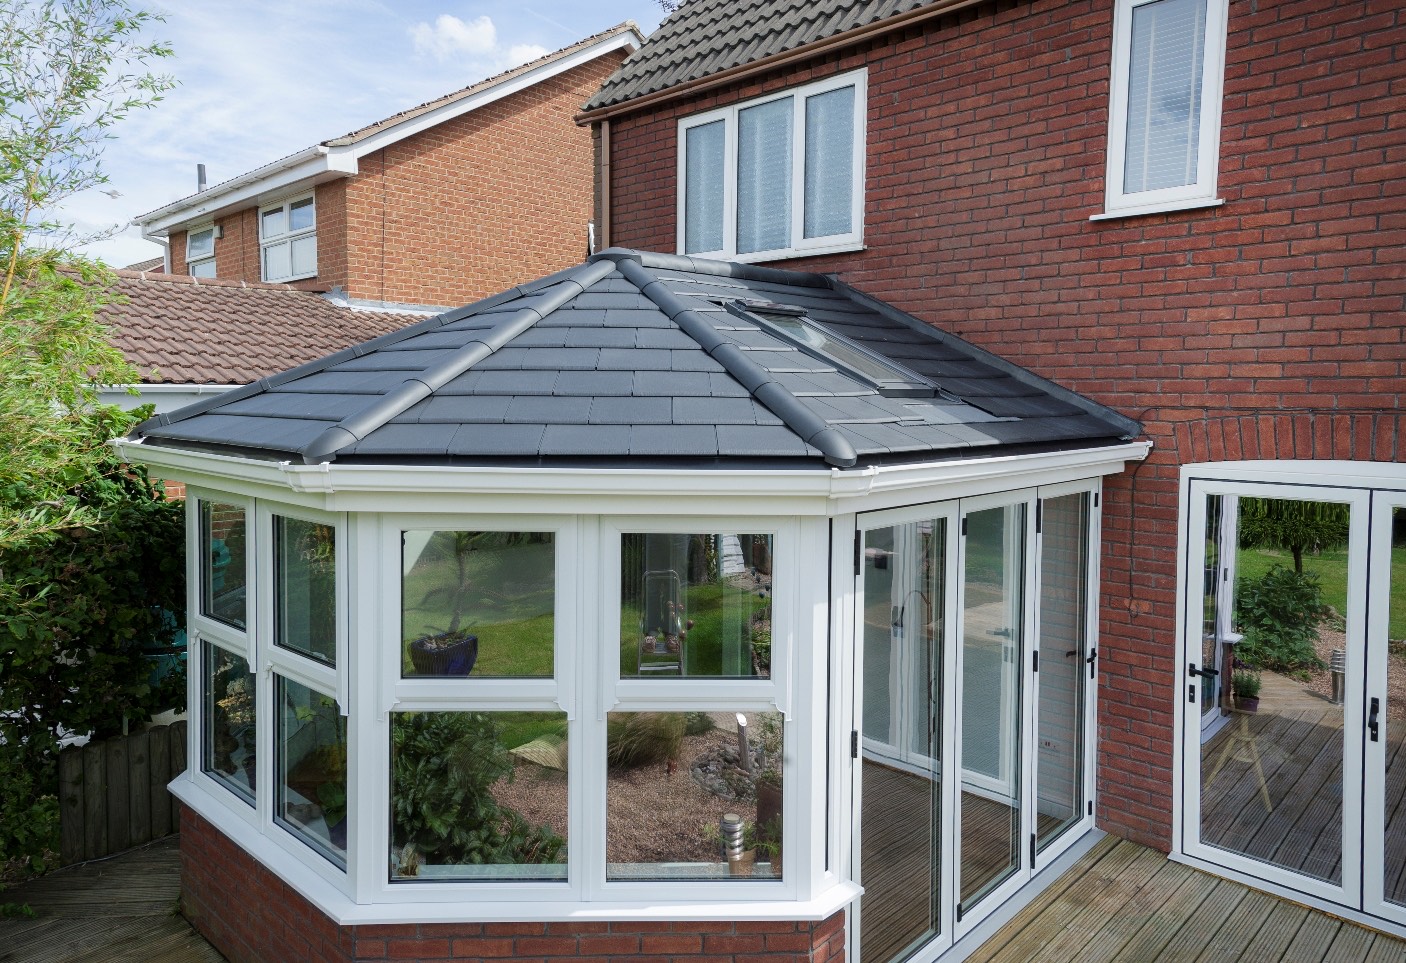 Victorian Conservatories with grey tiled roofs in Carmarthen and Wales